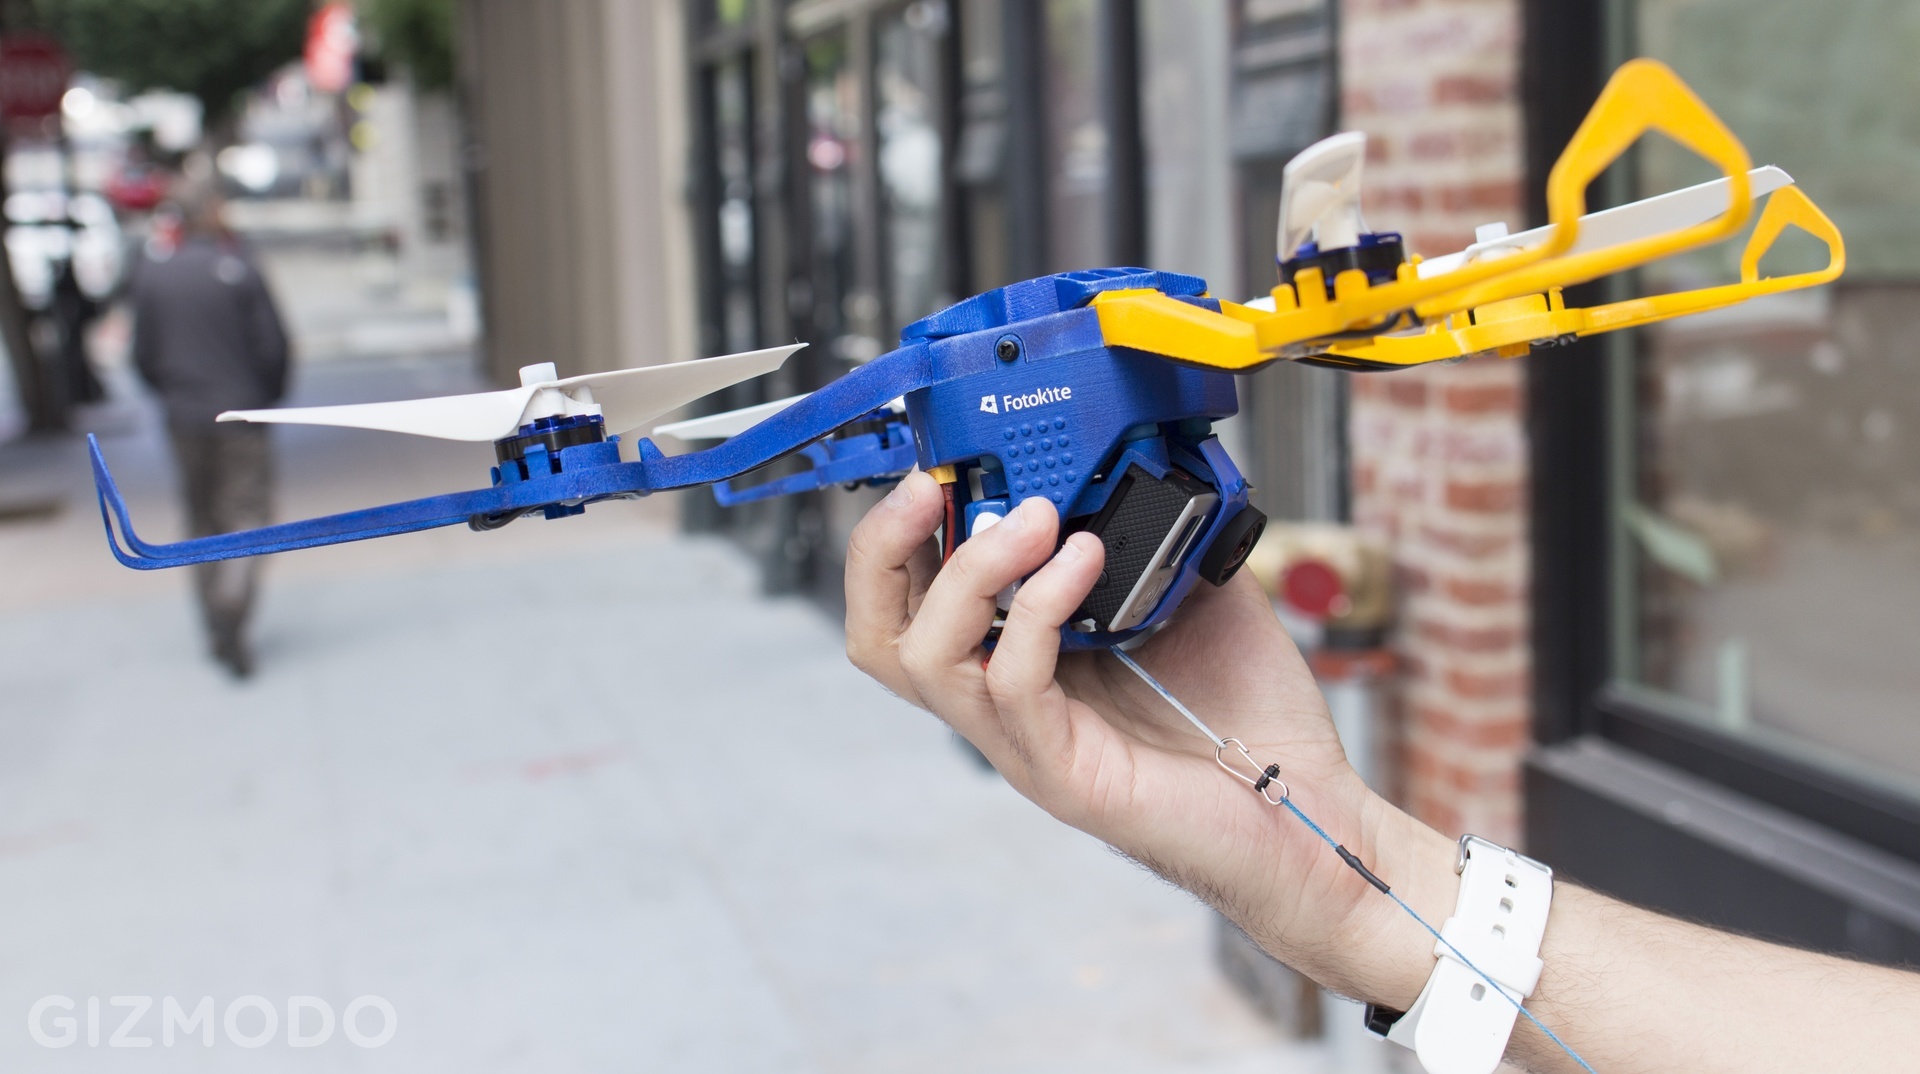 This Drone Goes From Canister To Aerial Selfie In 20 Seconds Flat